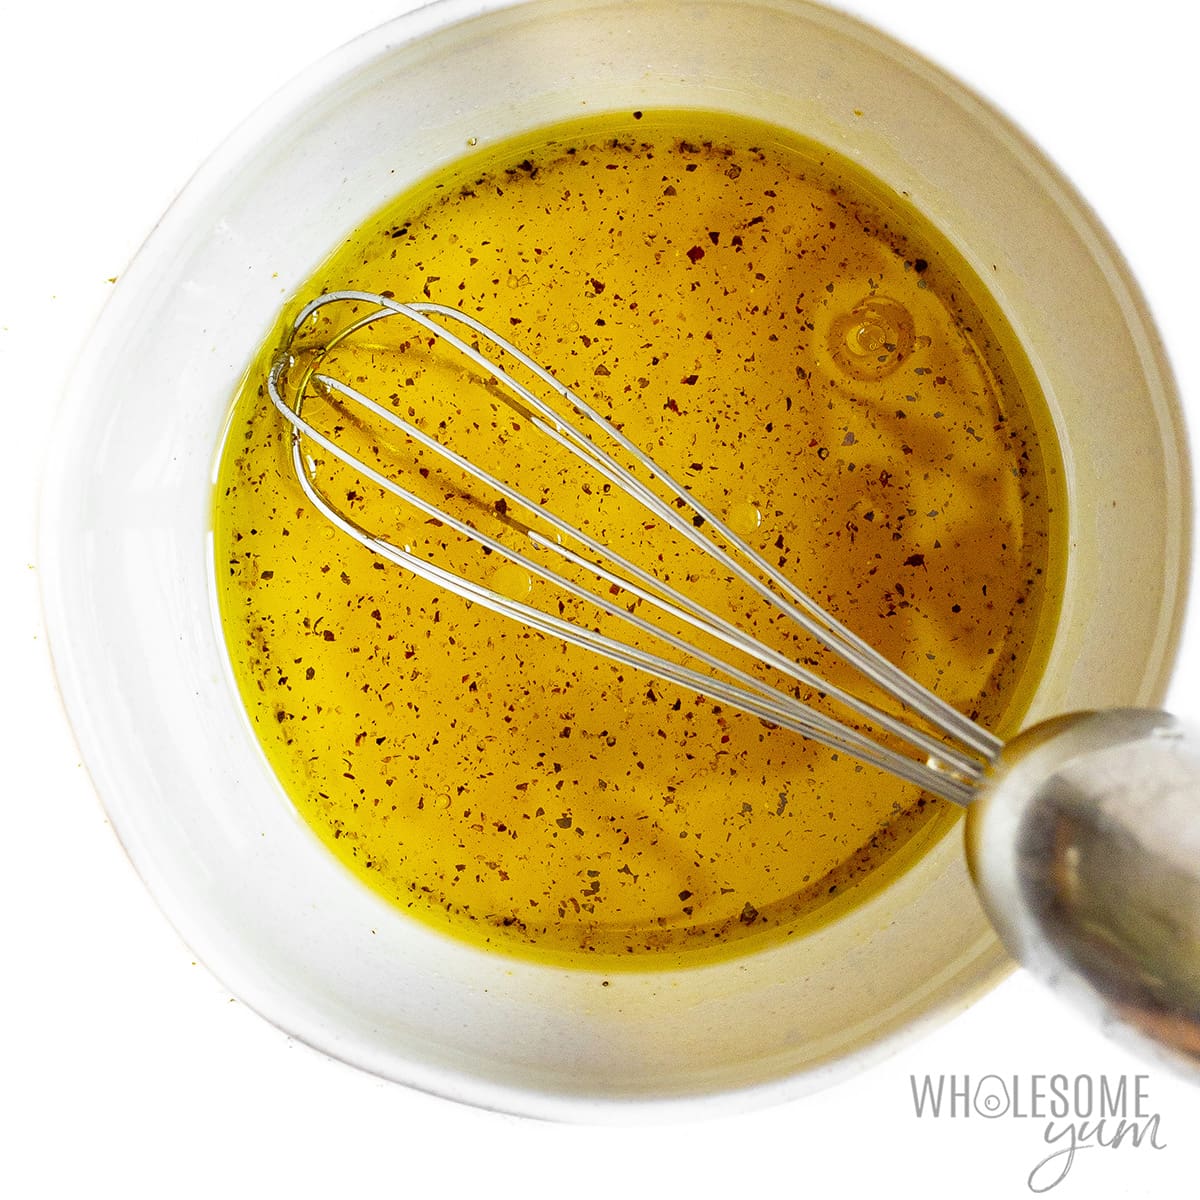 Dressing ingredients in a bowl with whisk.